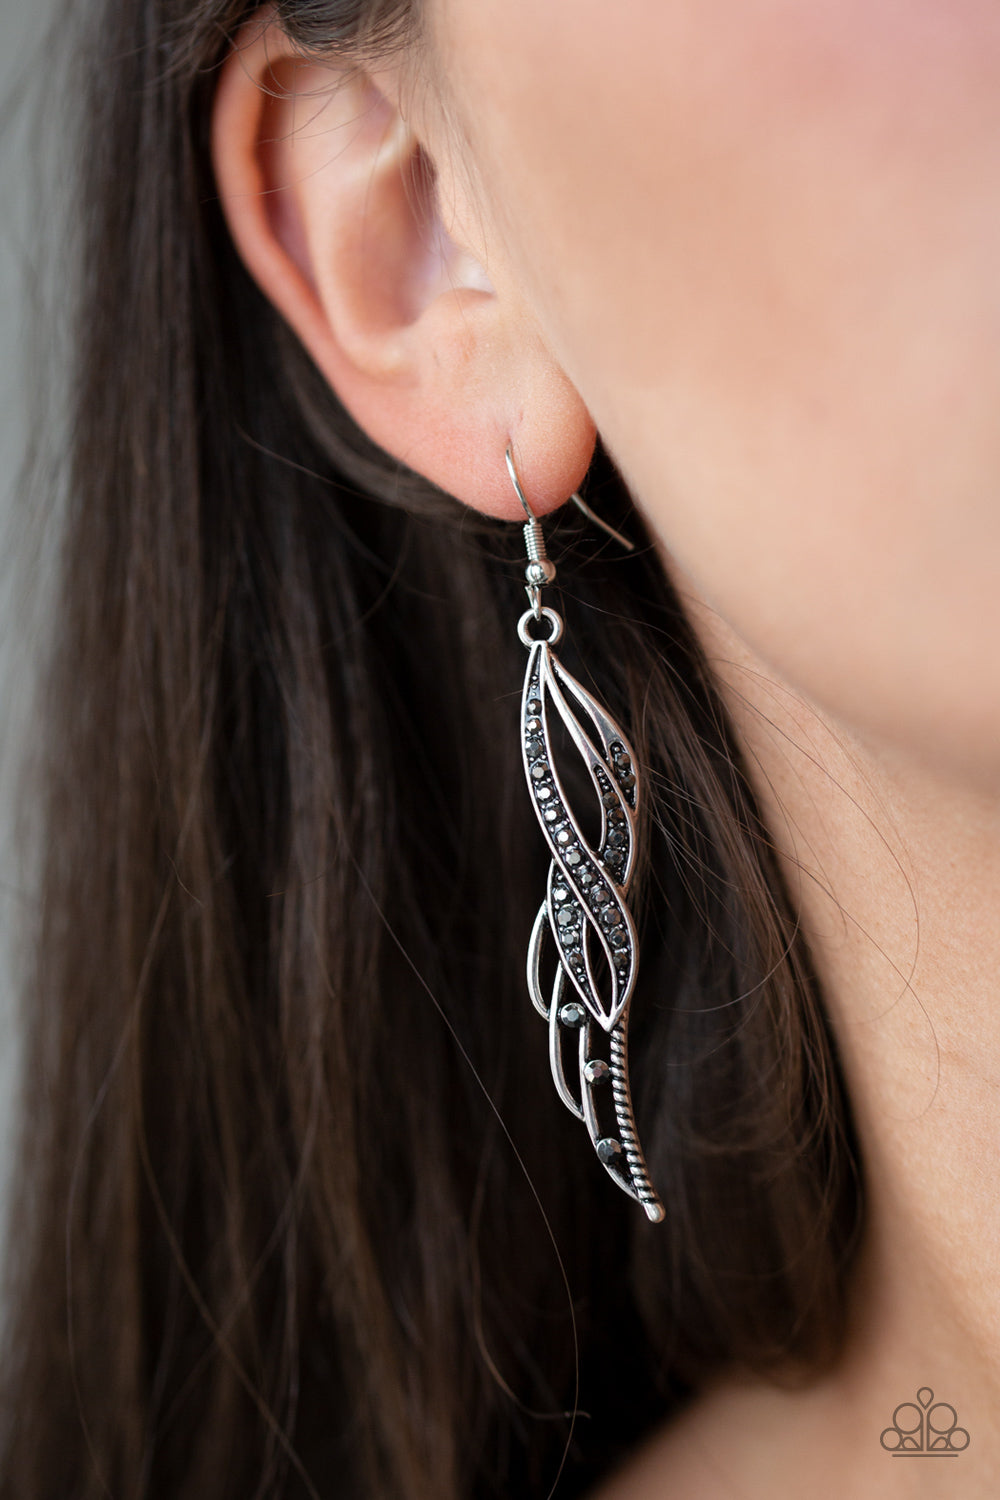 Let Down Your Wings Silver Earrings Paparazzi Accessories